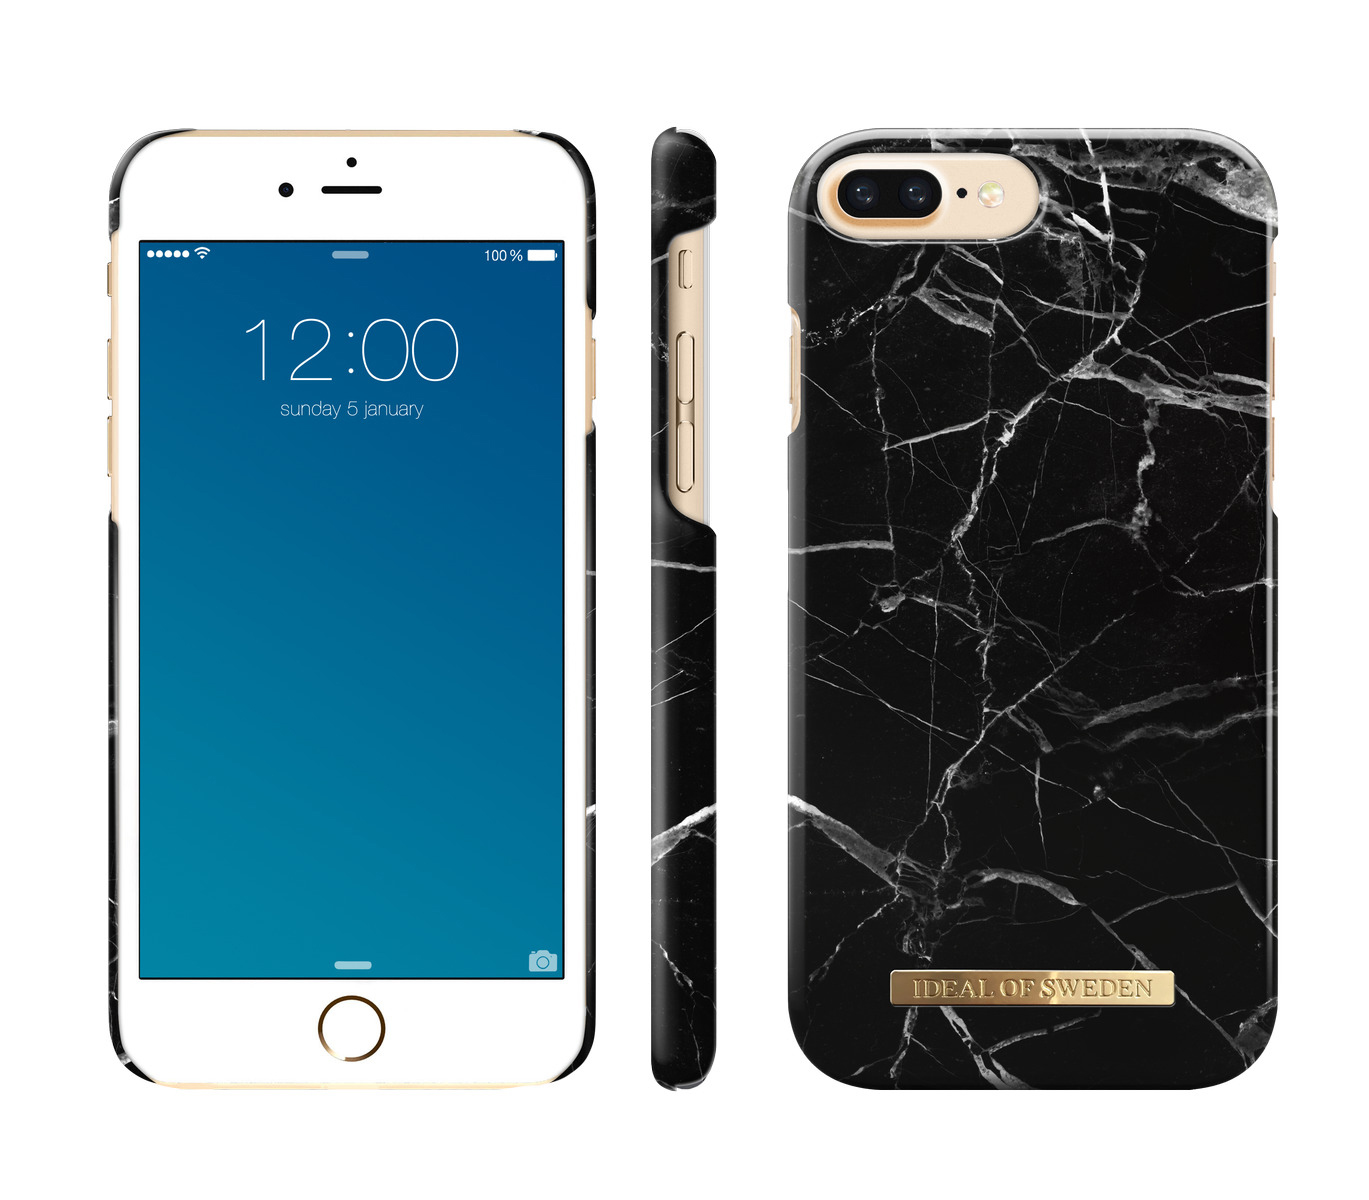 6 OF Fashion, SWEDEN 7 Plus, iPhone Black Plus Marble Apple, iPhone 8 ,iPhone IDEAL Backcover, Plus,